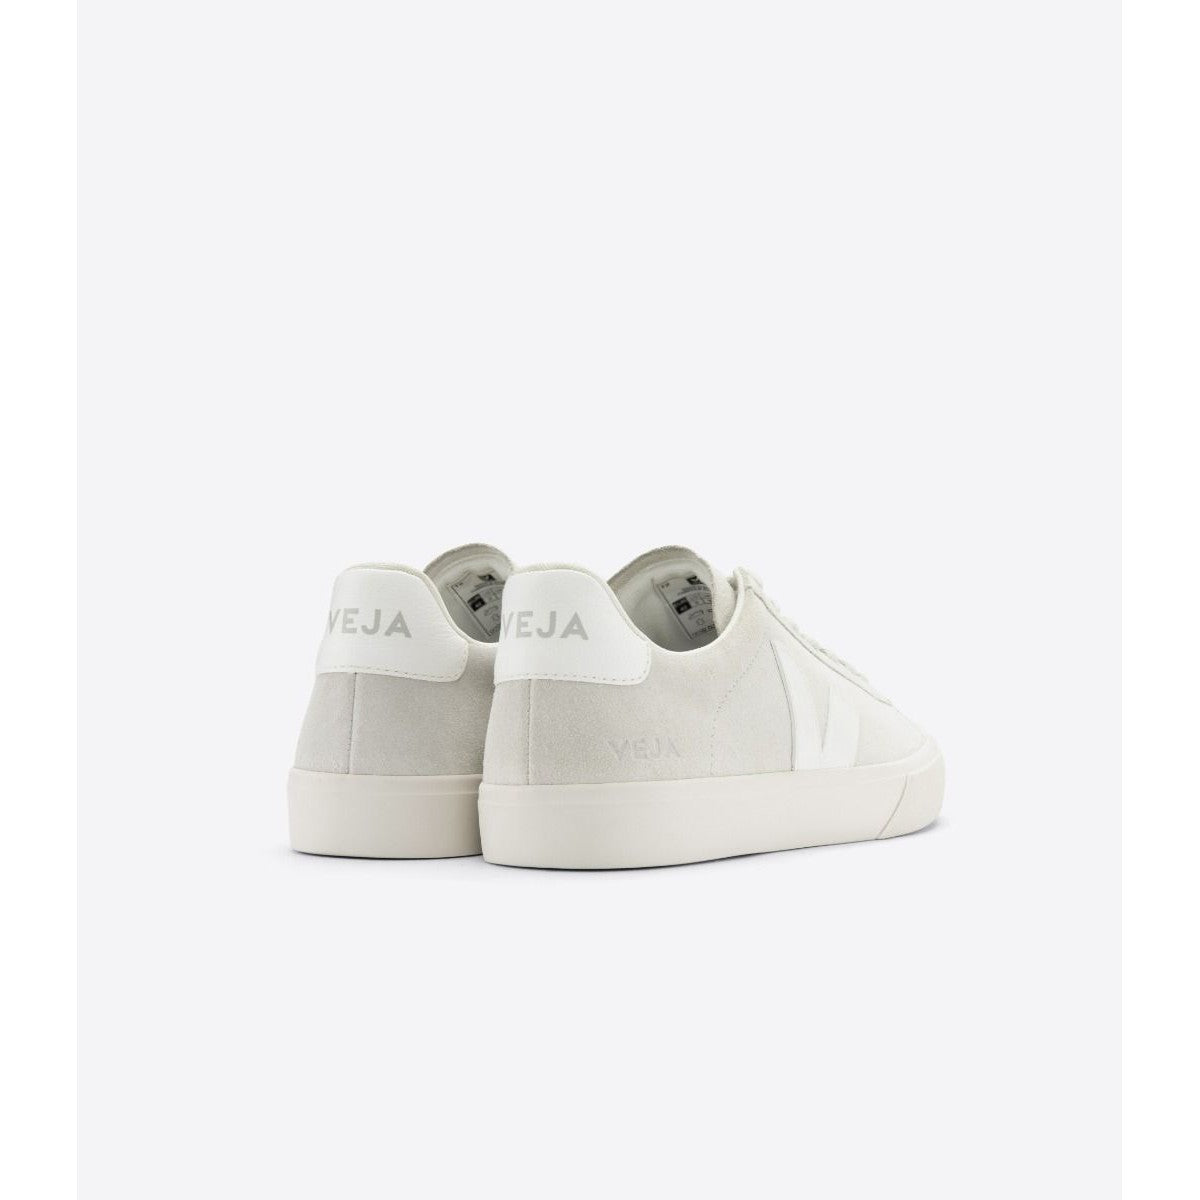 CAMPO SUEDE NATURAL-MENS SNEAKERS-VEJA-JB Evans Fashions & Footwear